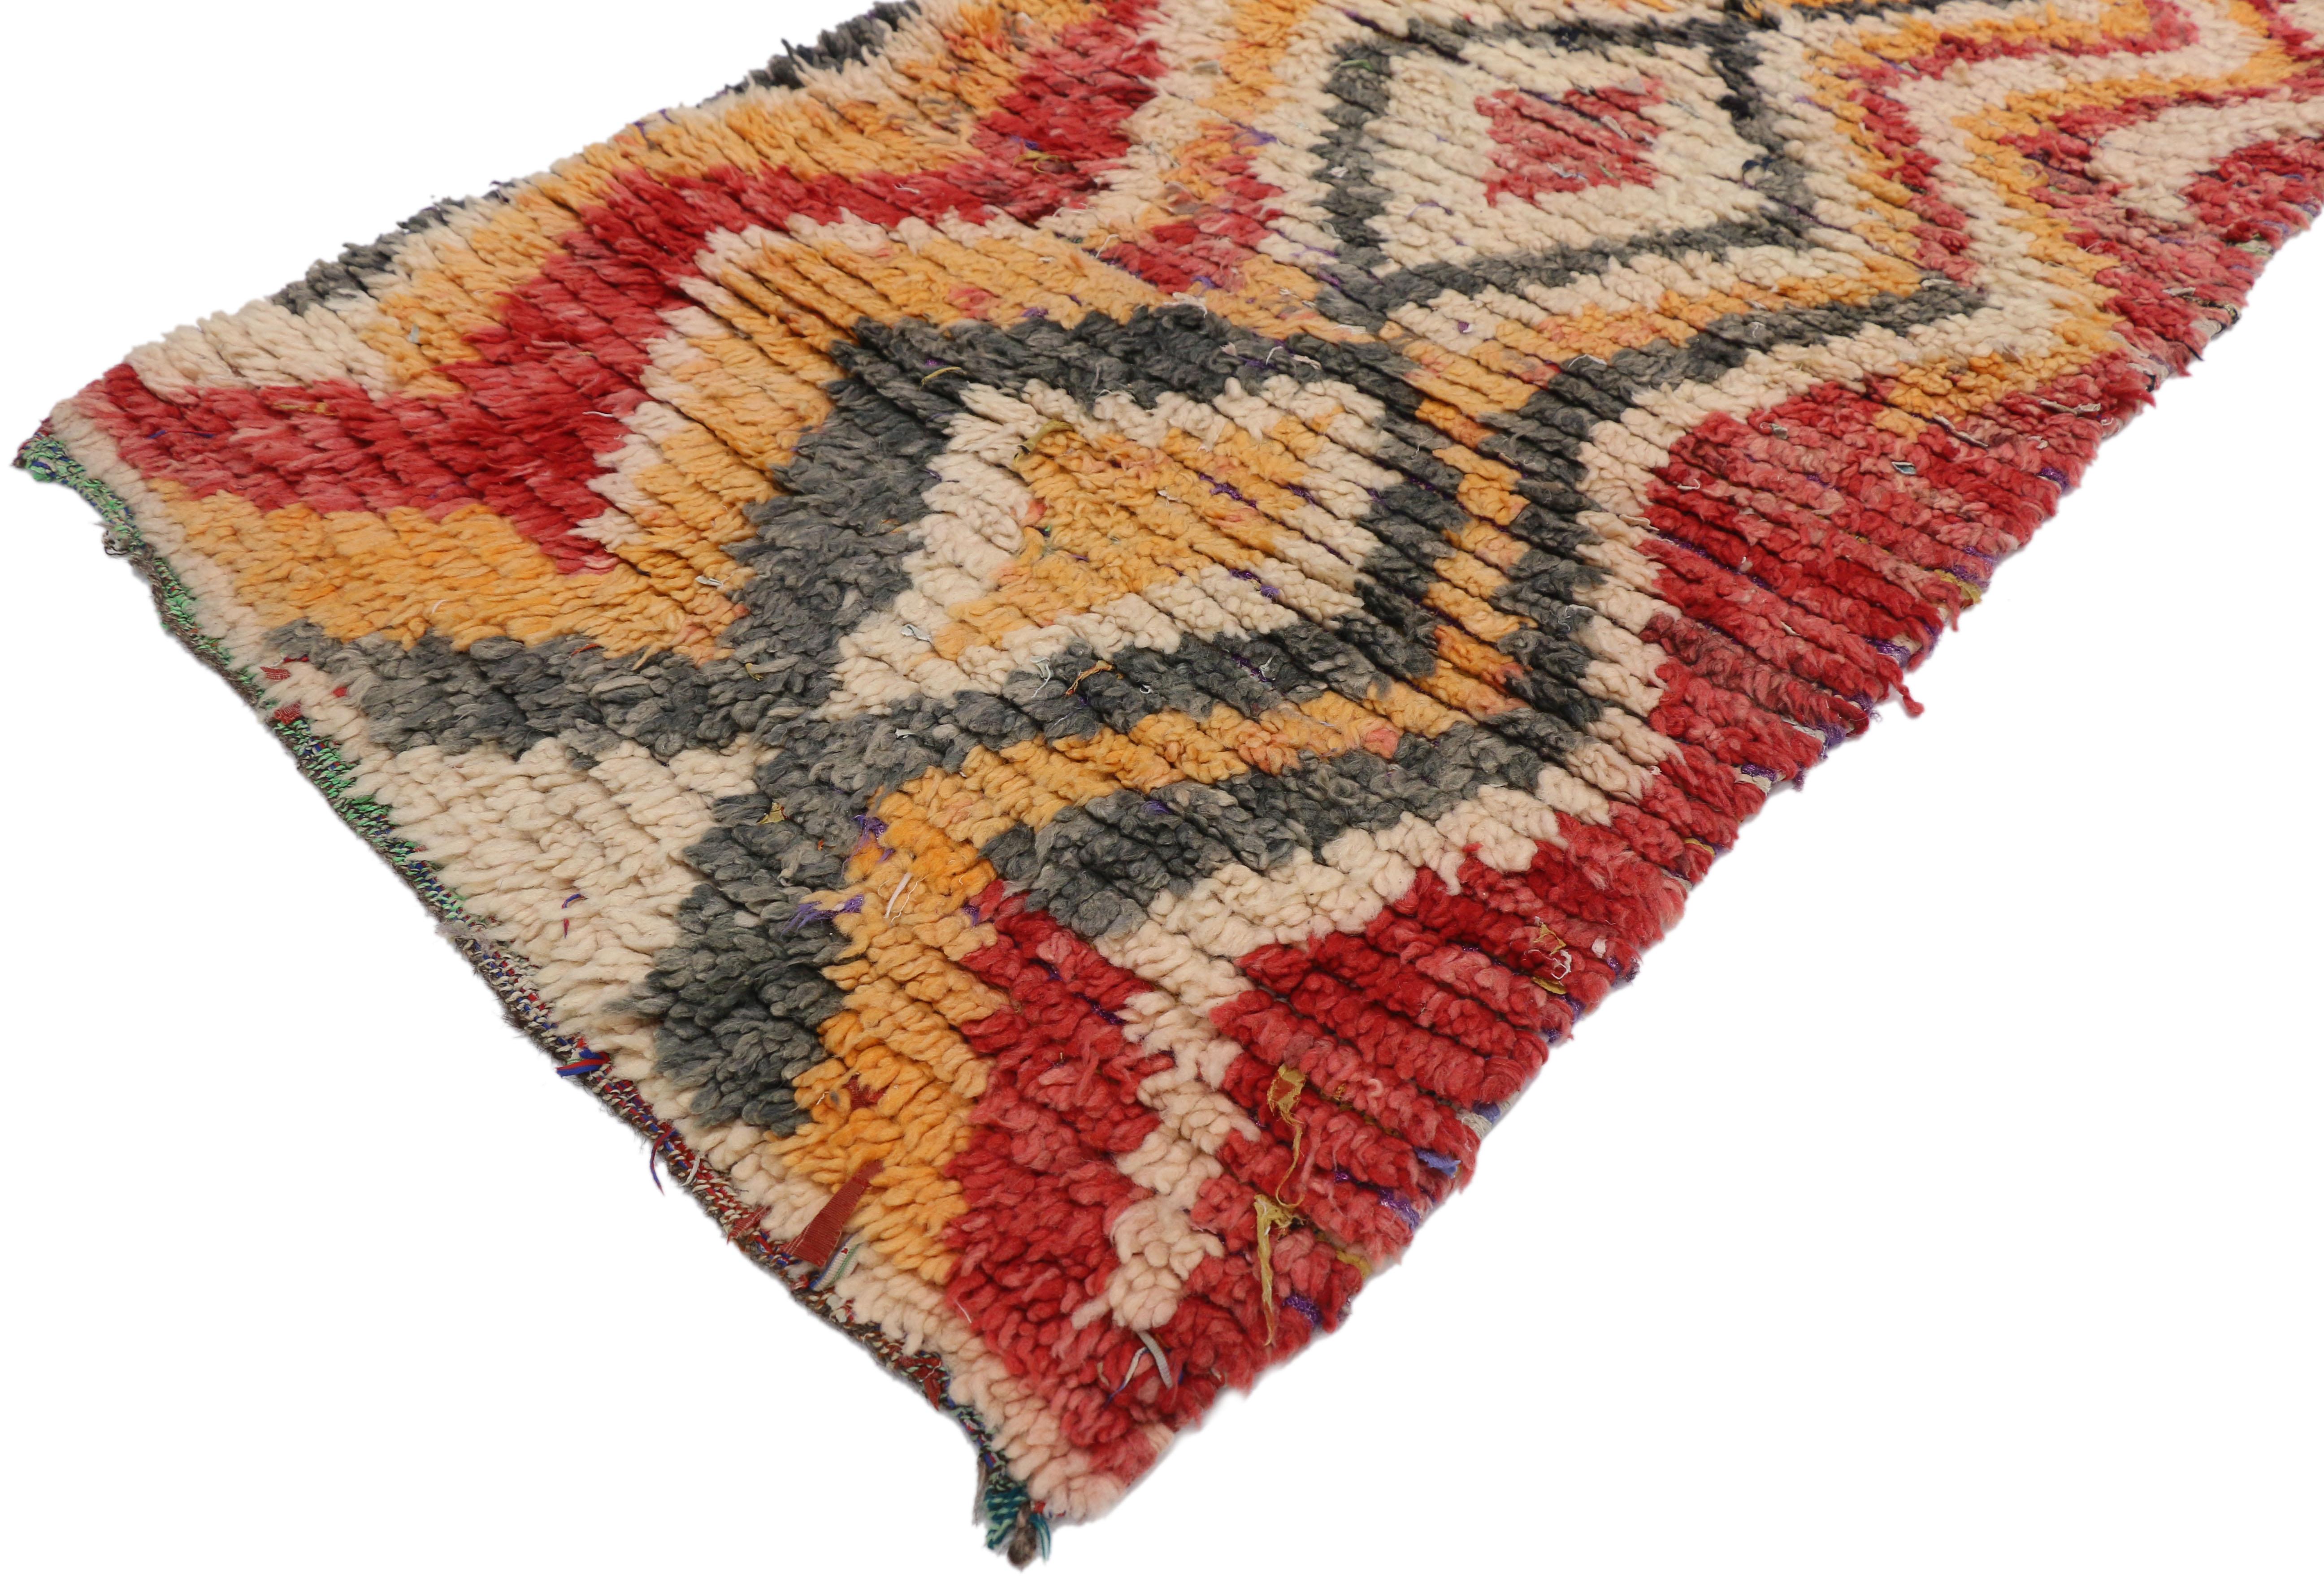 20848 Vintage Moroccan Boujad Rug, Colorful Berber Boucherouite Moroccan Azilal Rug. This vintage Moroccan Boujad rug features a column of stacked lozenges with extended sides forming a chevron pattern. Though deceptively simple, this composition